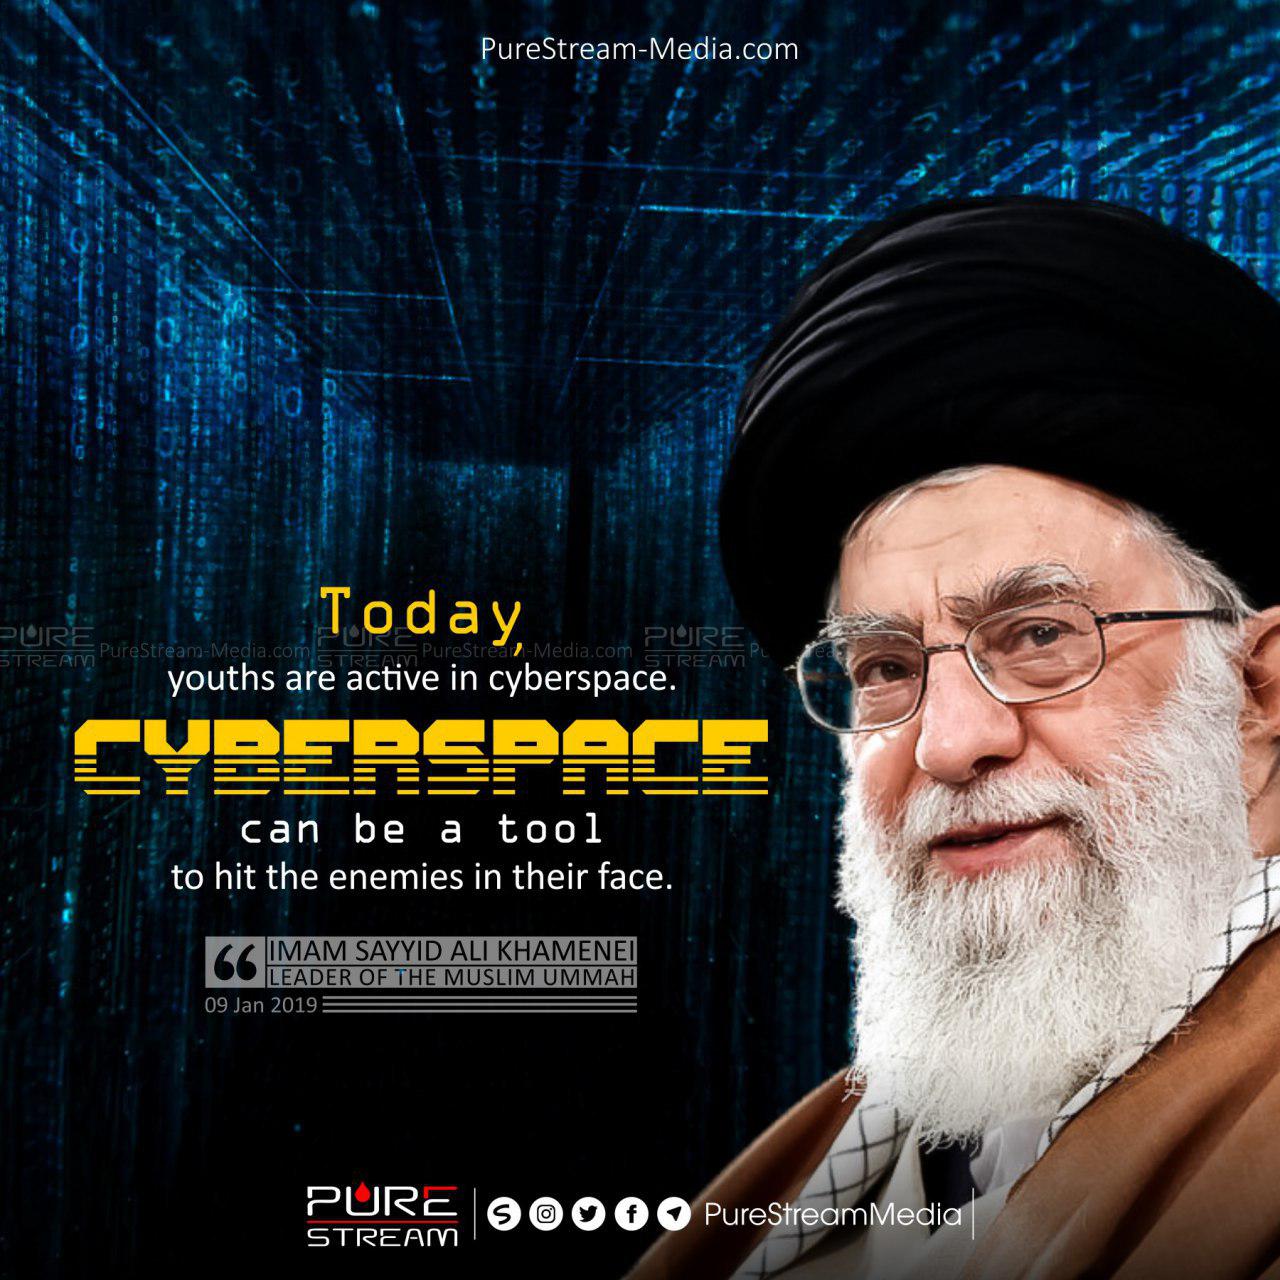 Today, youths are active in cyberspace…